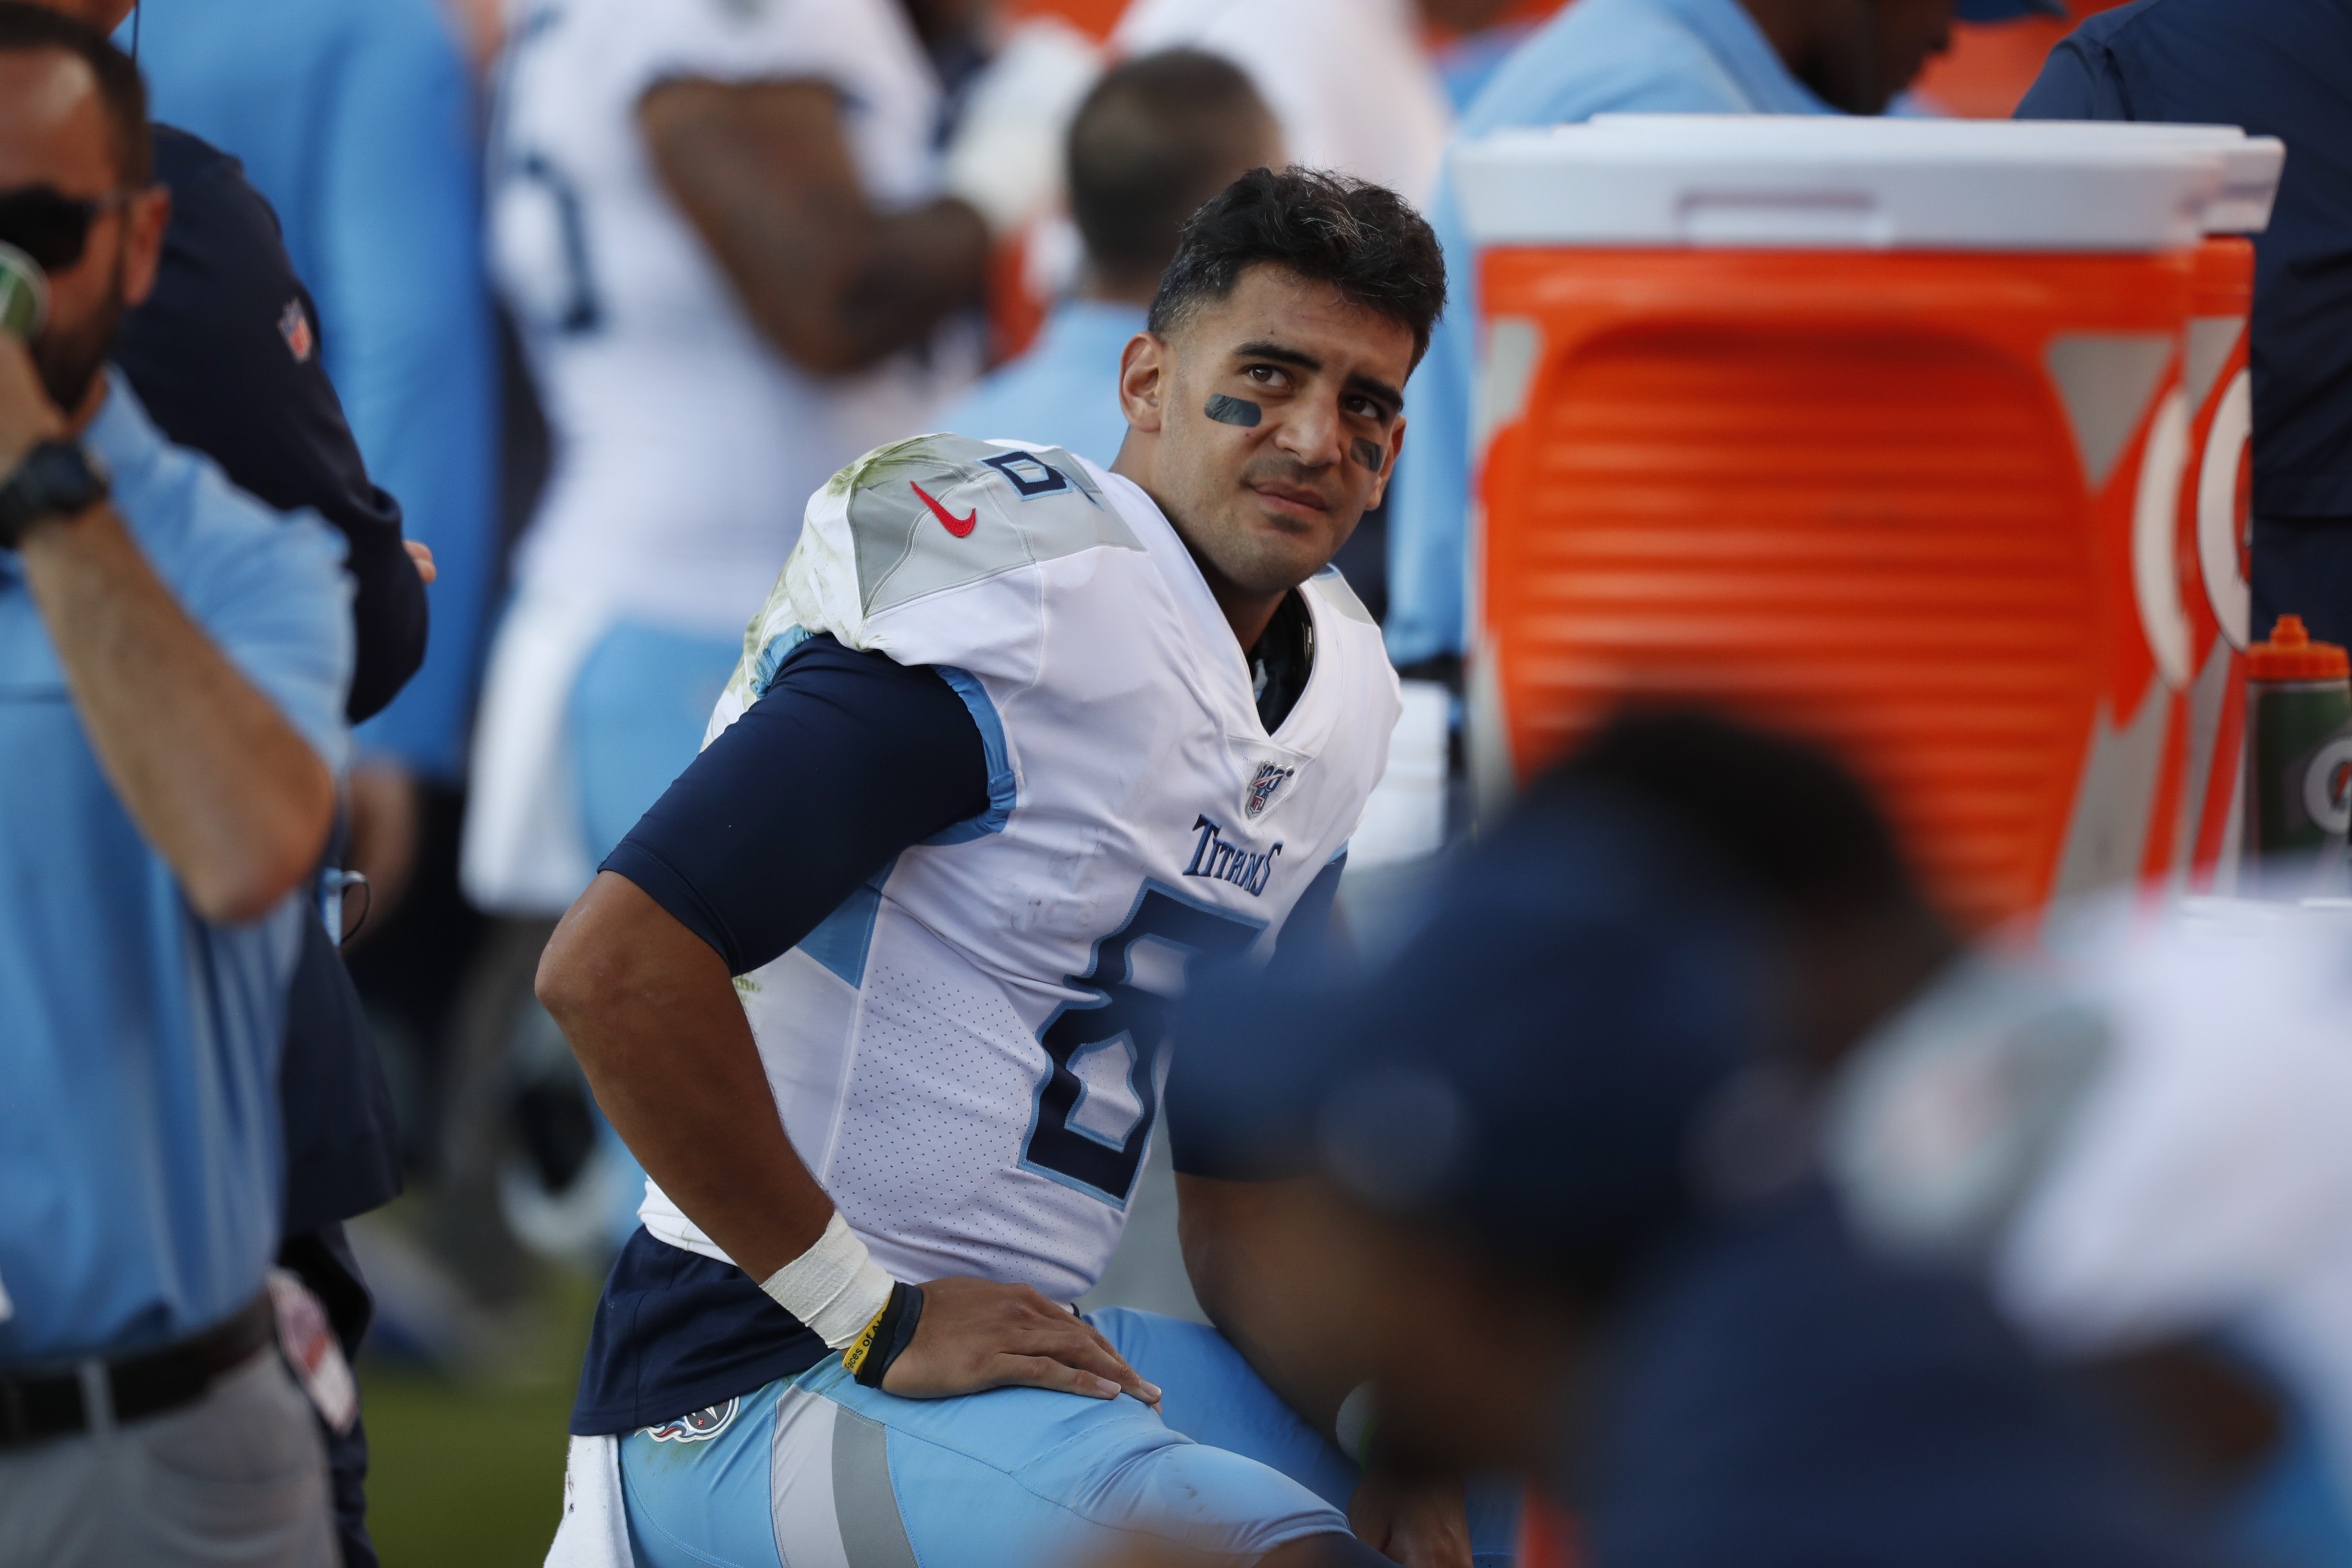 Mariota's starting spot in flux after benching vs Broncos